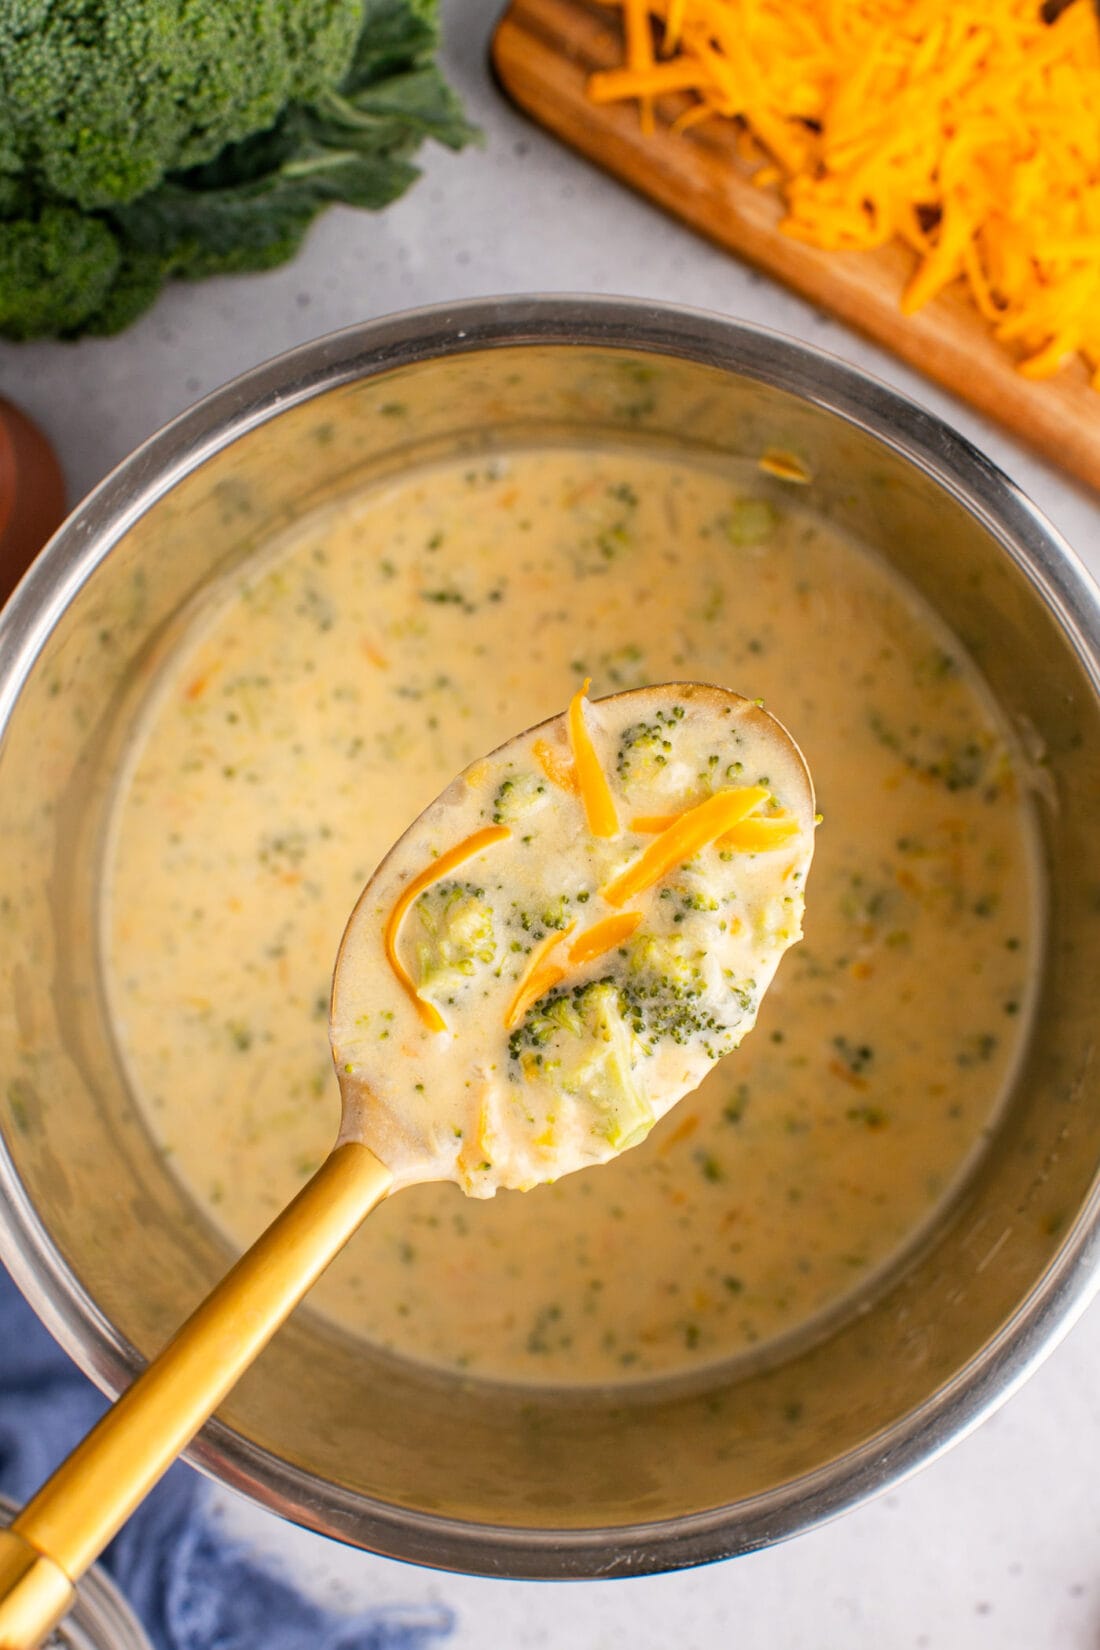 Spoonful of Instant Pot Broccoli Cheddar Soup being lifted above the instant pot